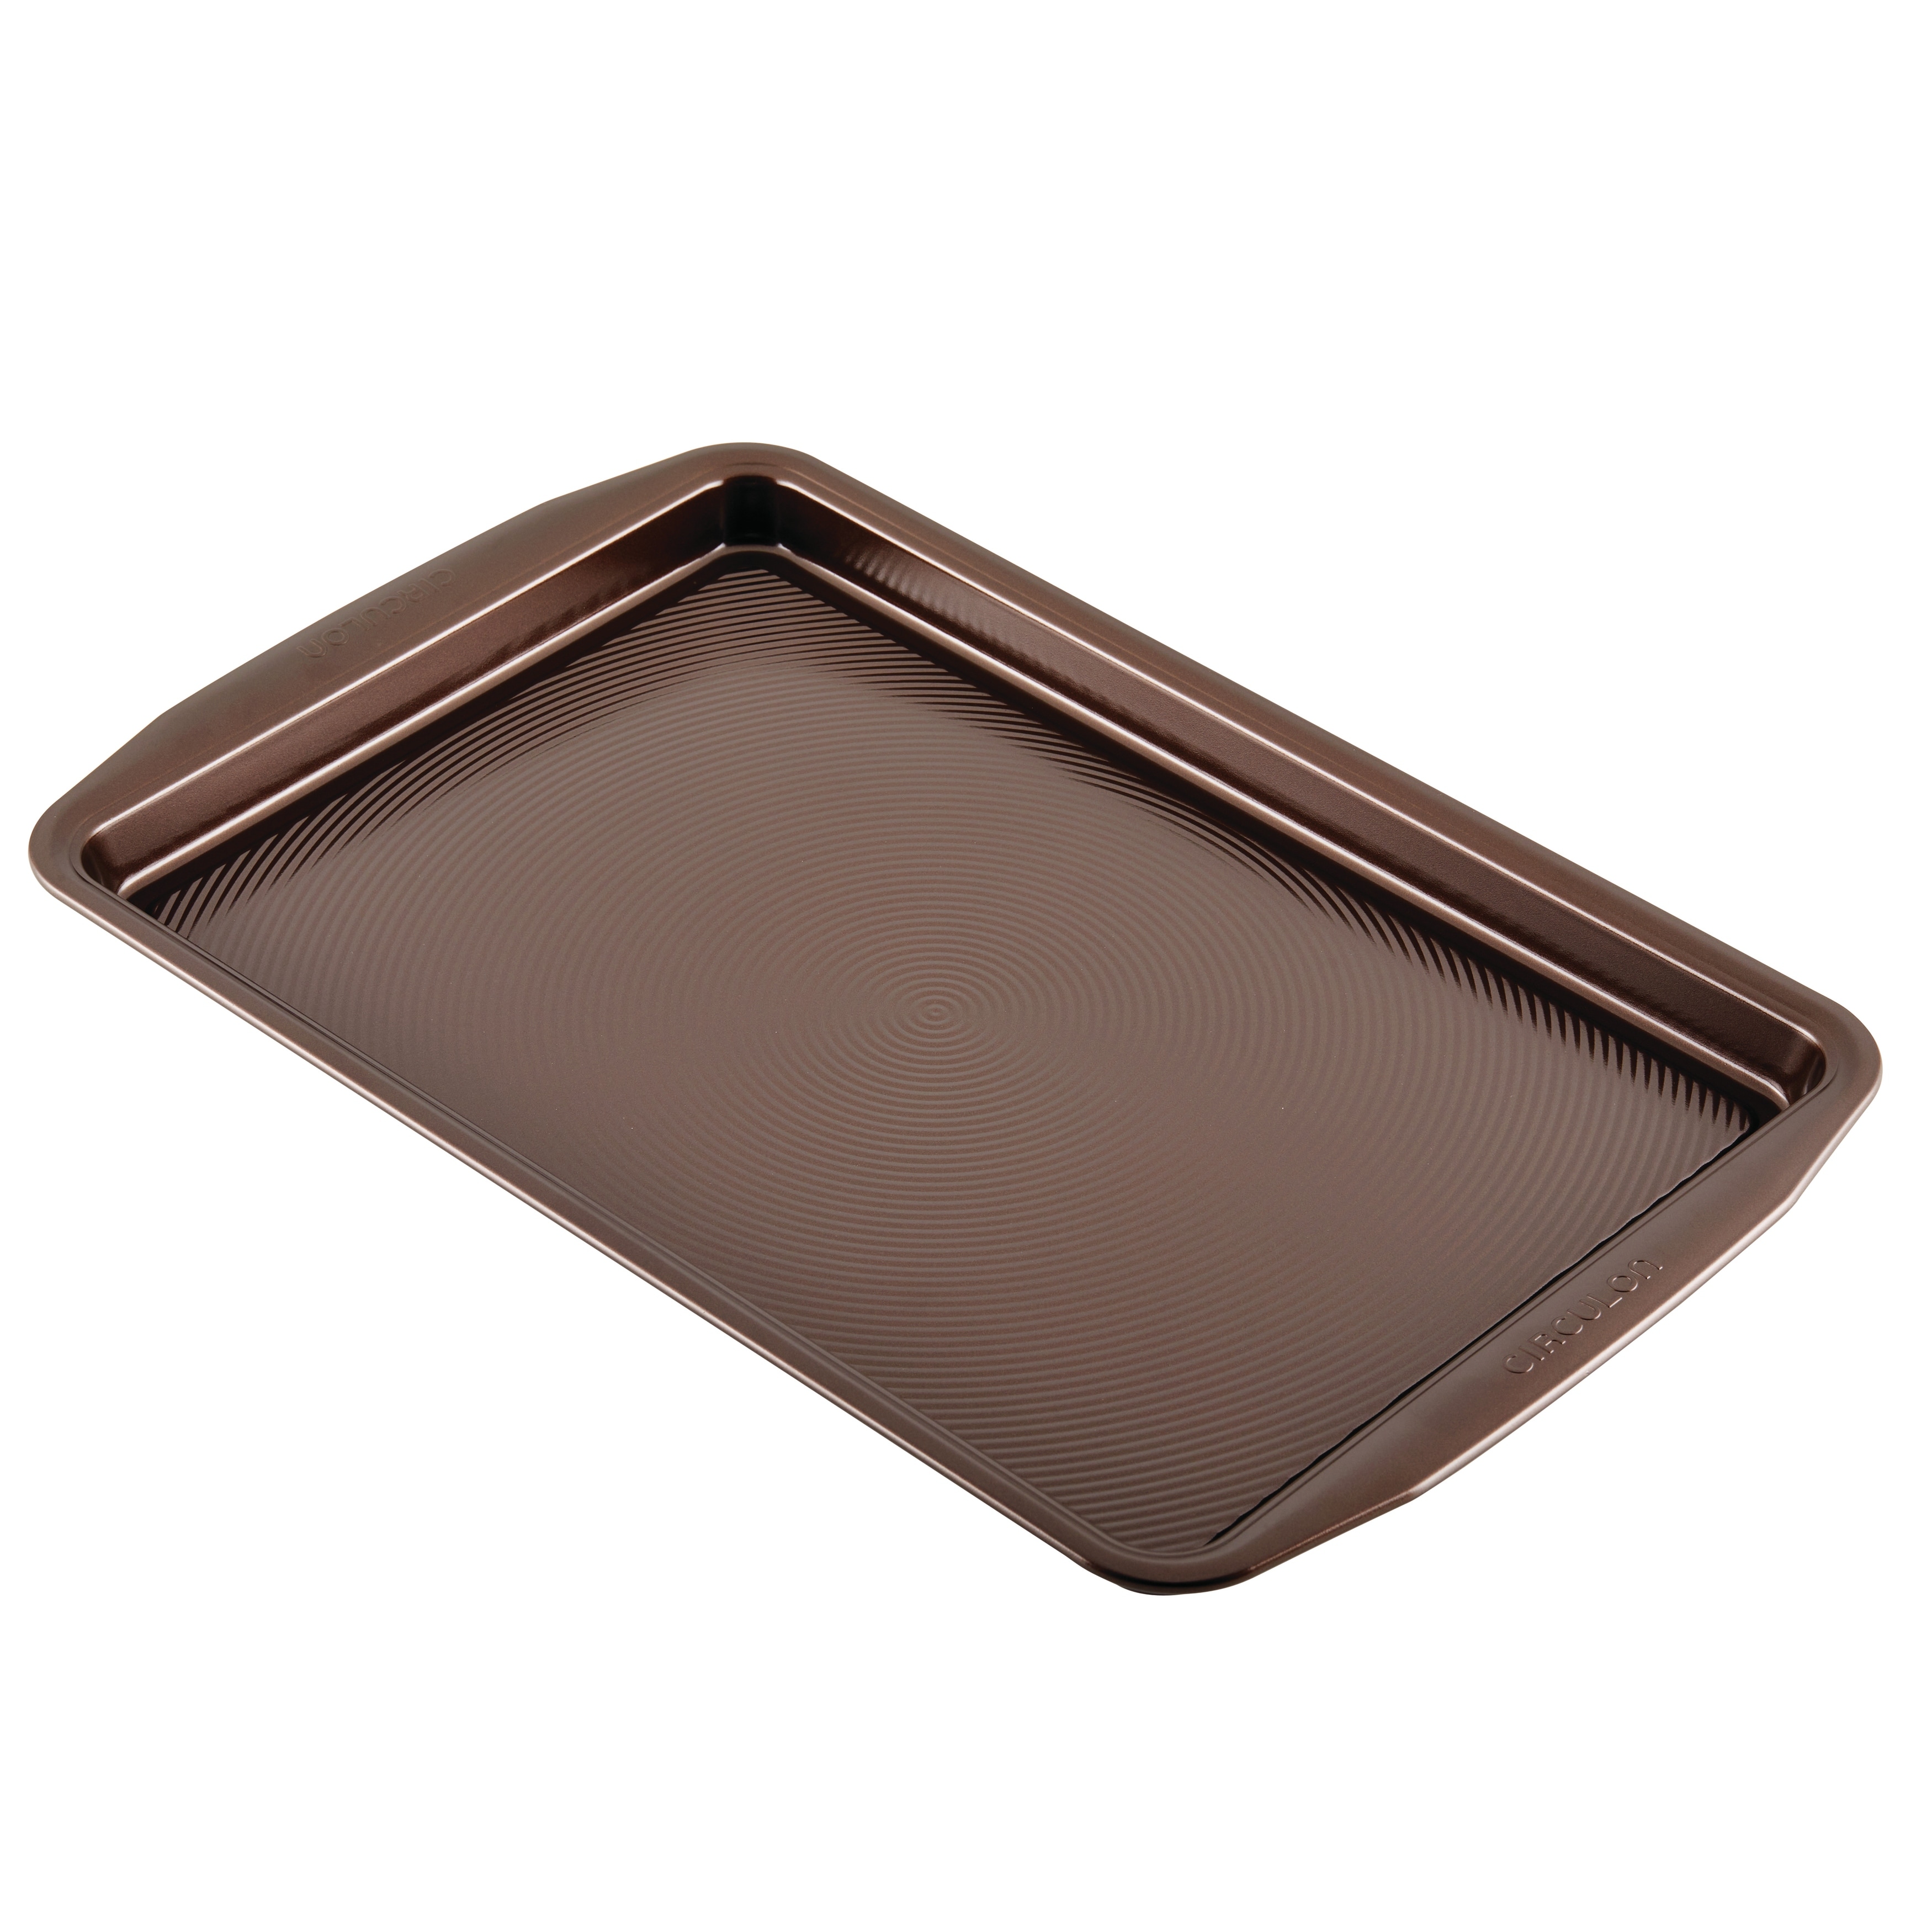 https://ak1.ostkcdn.com/images/products/is/images/direct/df2116319dcd2ddbcf4967f45a509b3631b4ecad/Circulon-Bakeware-Nonstick-Cookie-Pan%2C-11-Inch-x-17-Inch%2C-Chocolate-Brown.jpg